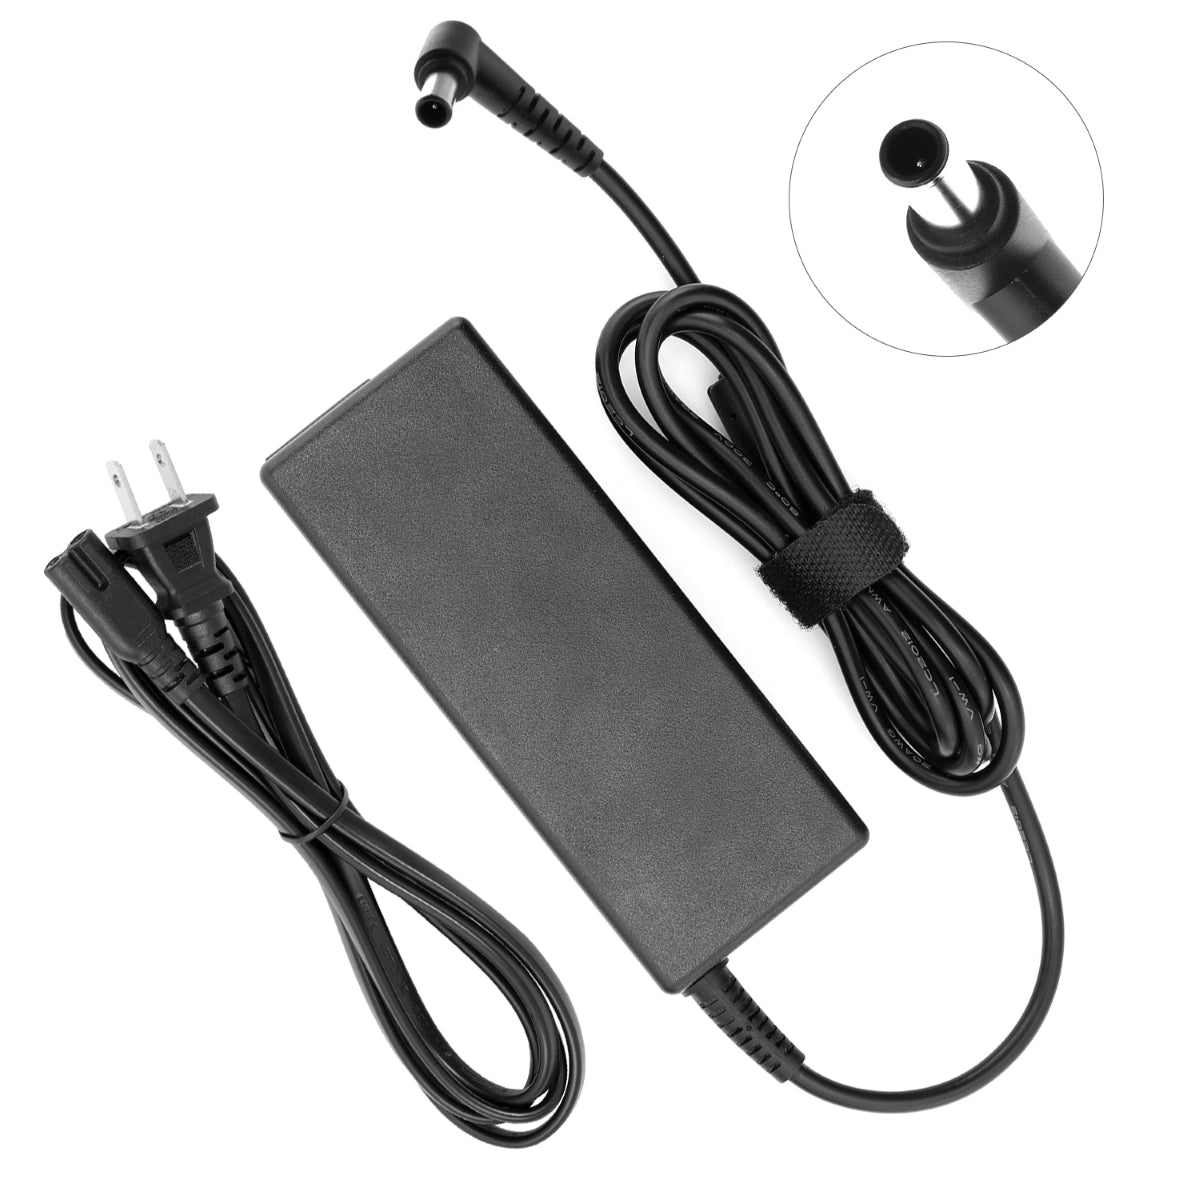 AC Adapter for LG 23EA63V Monitor